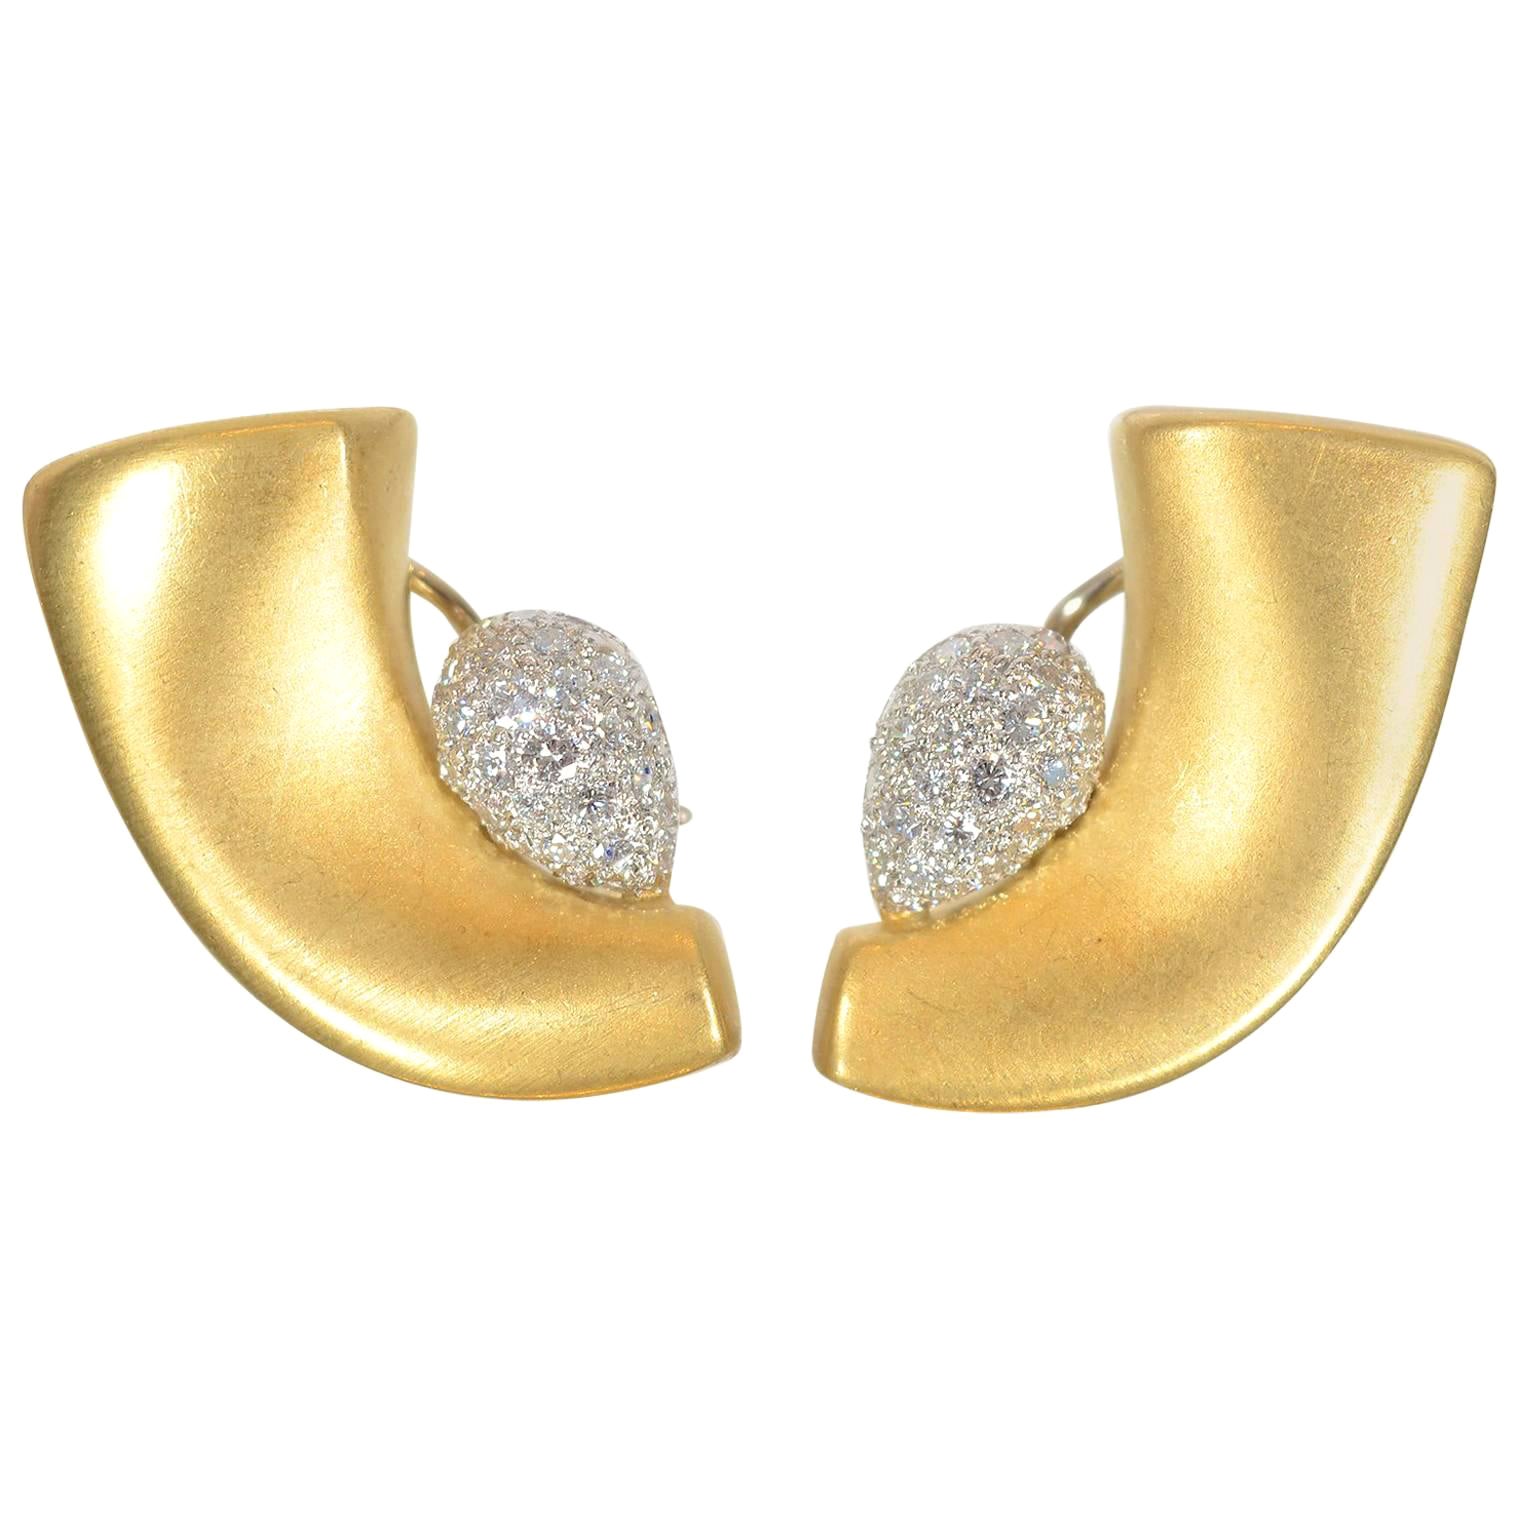 Marlene Stowe Crescent Earrings with Pave Diamonds For Sale